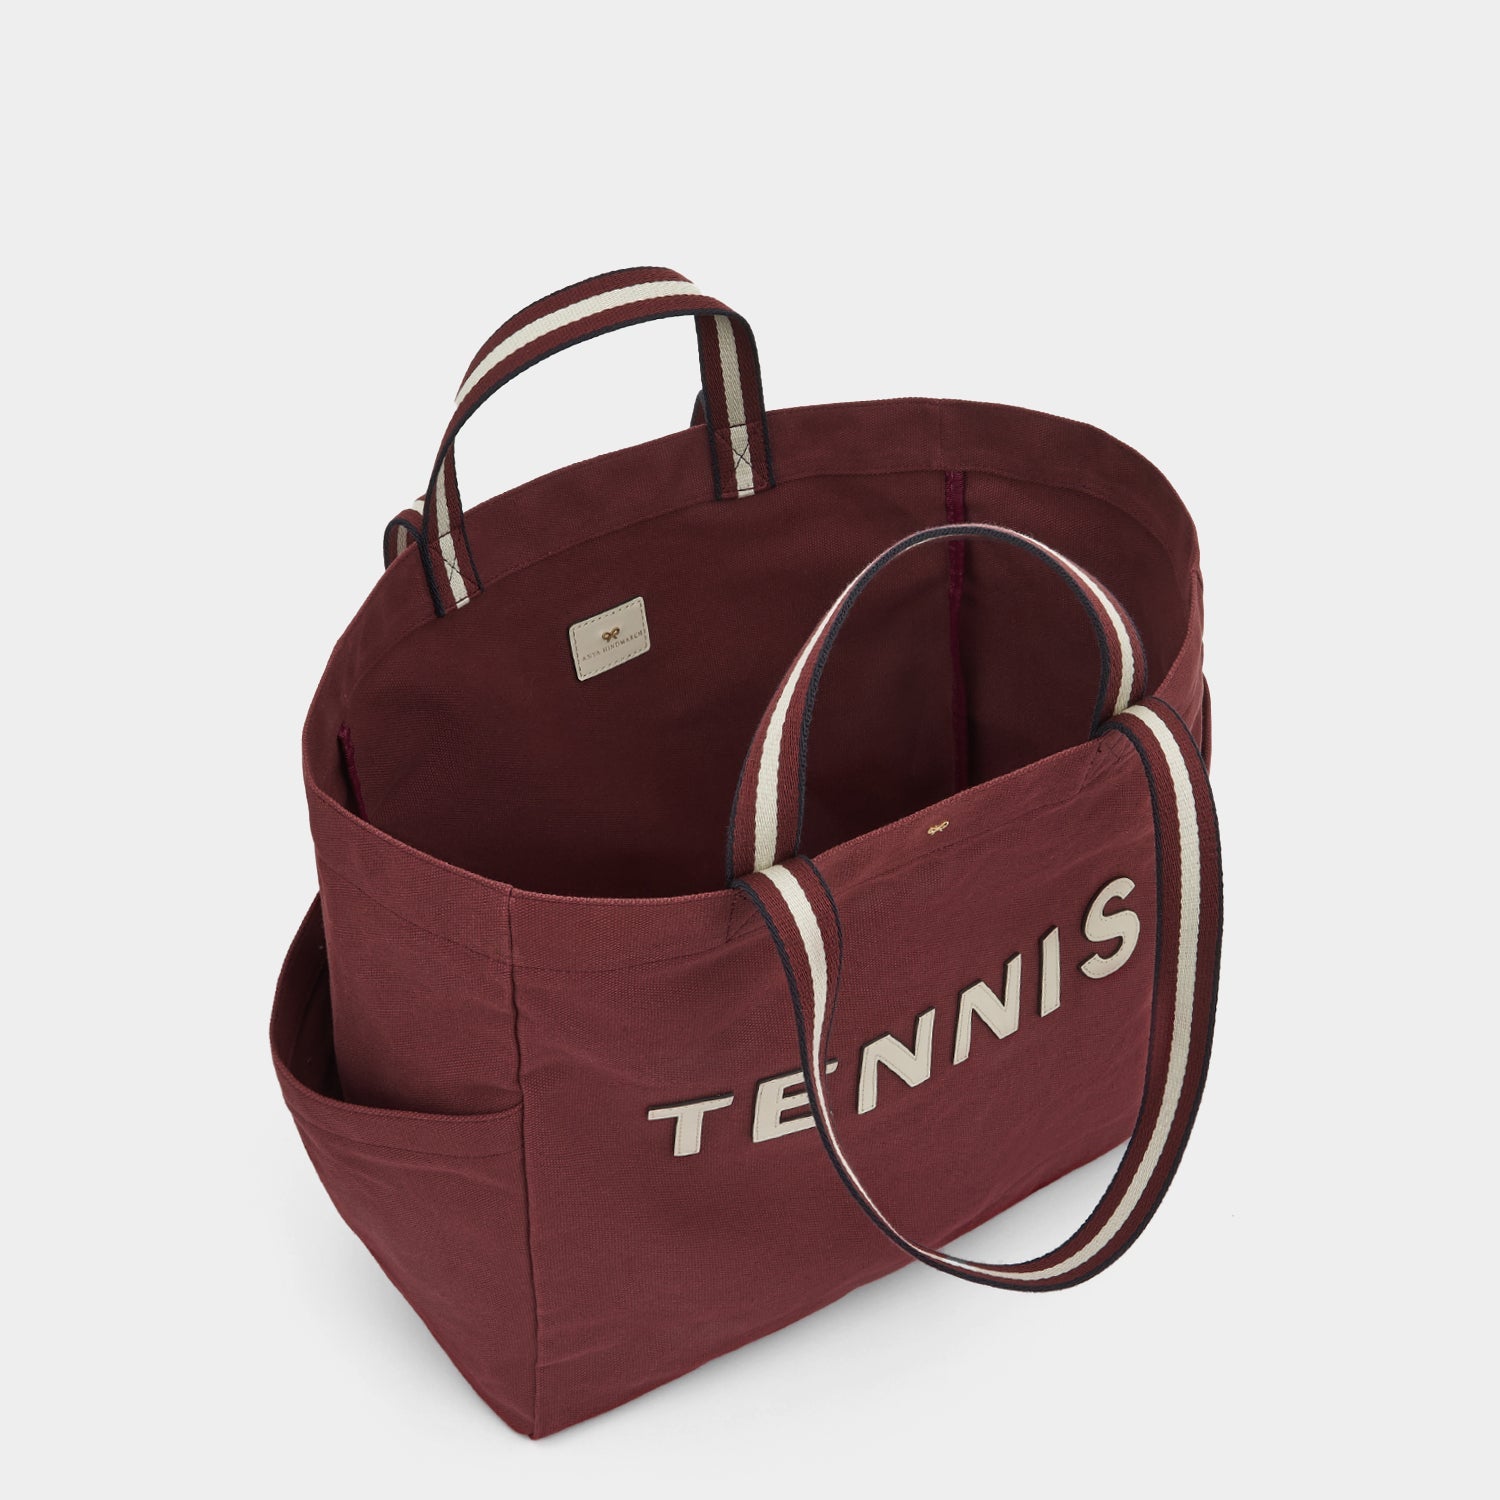 Tennis Household Tote -

                  
                    Recycled Canvas in Medium Red -
                  

                  Anya Hindmarch US
